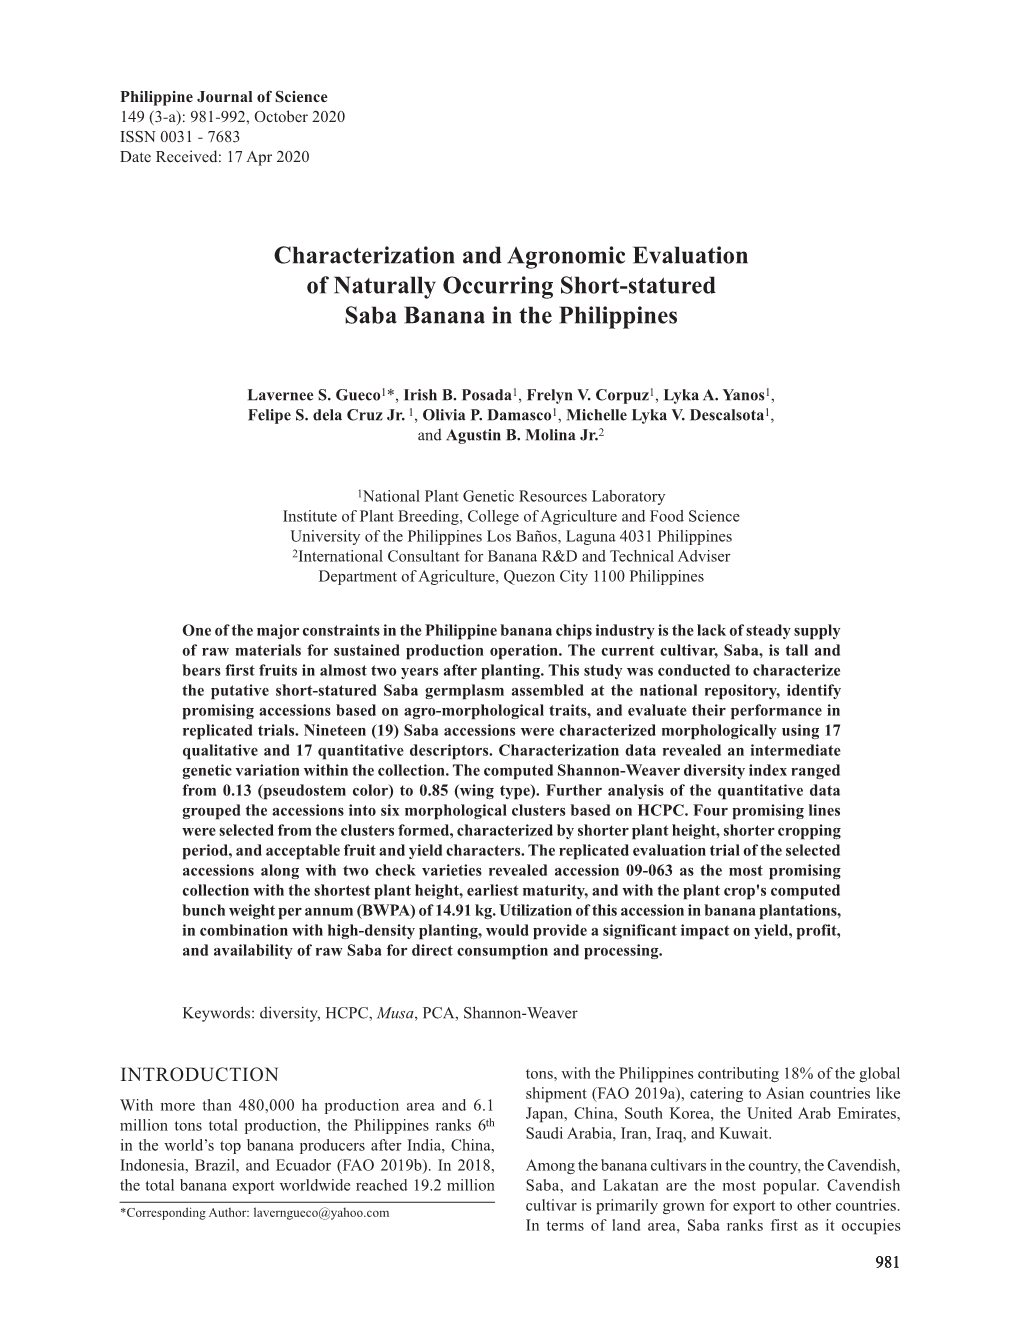 Characterization and Agronomic Evaluation of Naturally Occurring Short-Statured Saba Banana in the Philippines